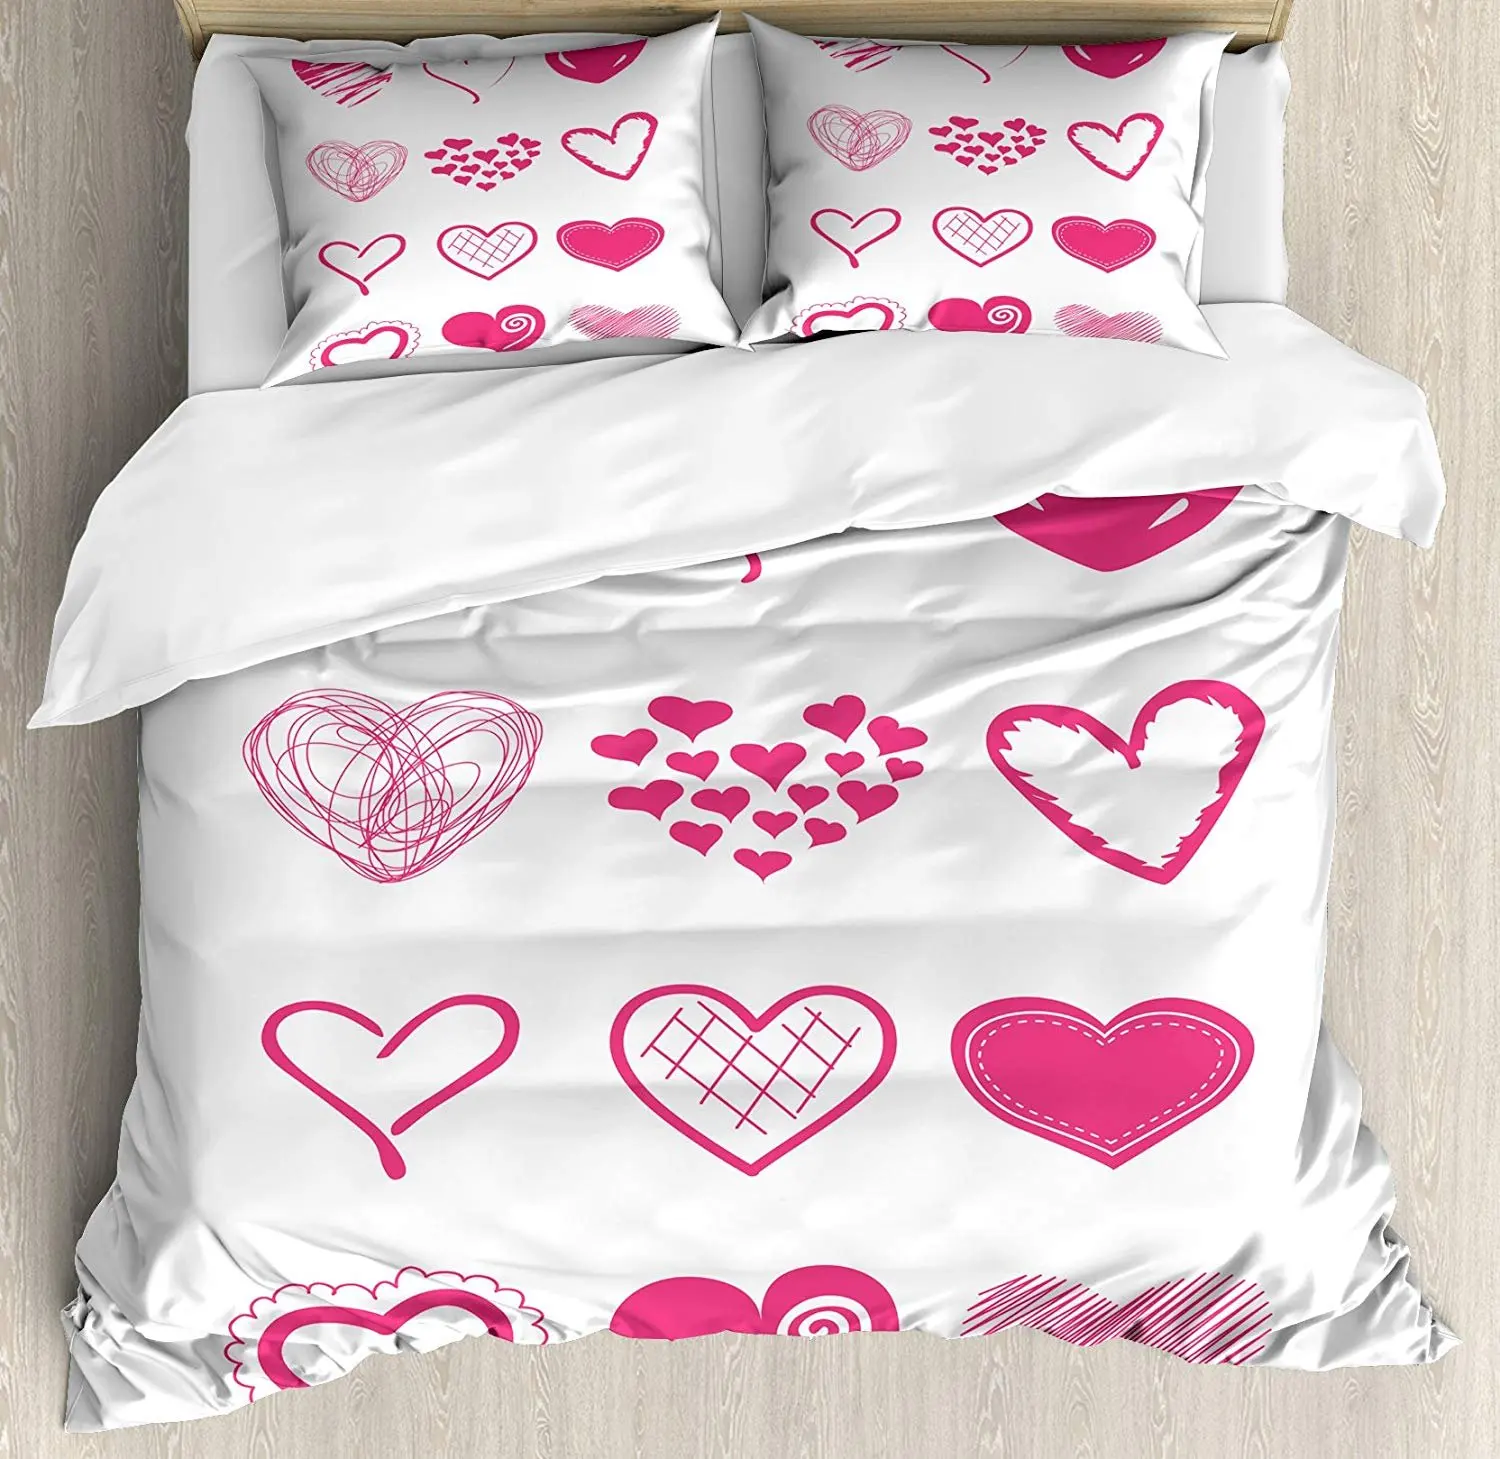 

Pink and White Bedding Set Cute Doodle Valentine's Hearts with Different Patterns Being In Love Duvet Cover Pillowcase for Home